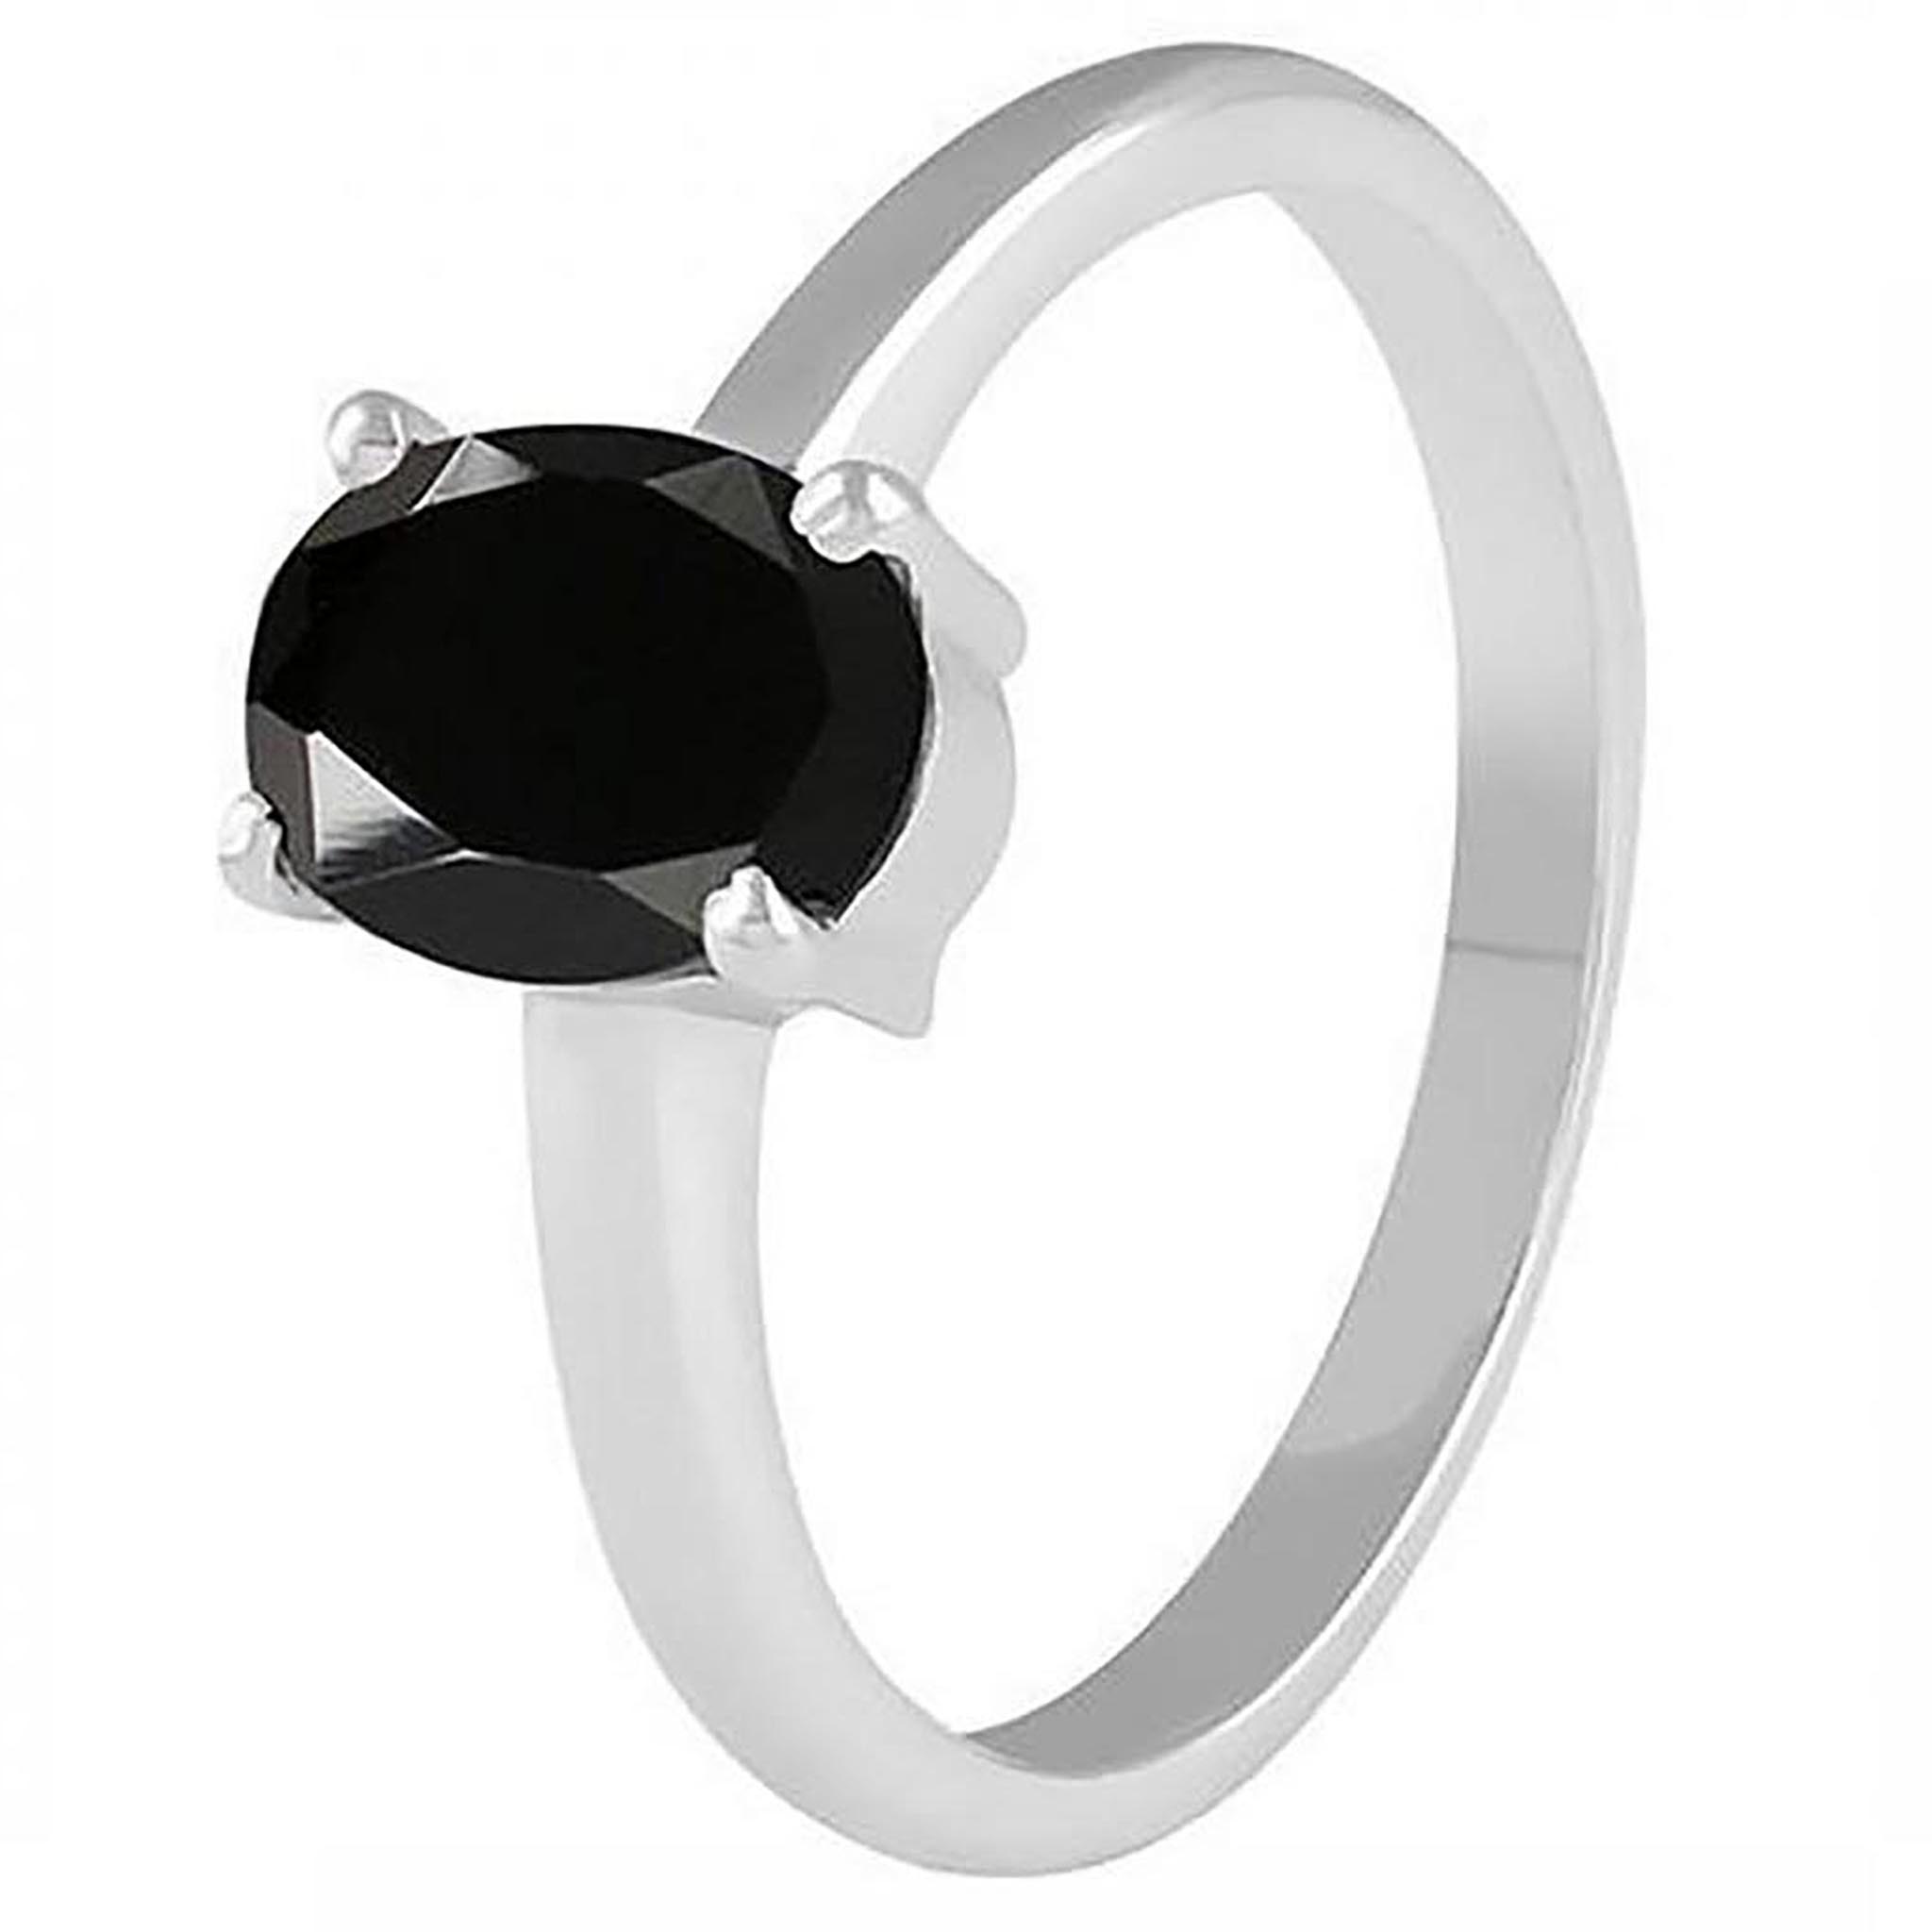 Faceted Black Onyx Ring